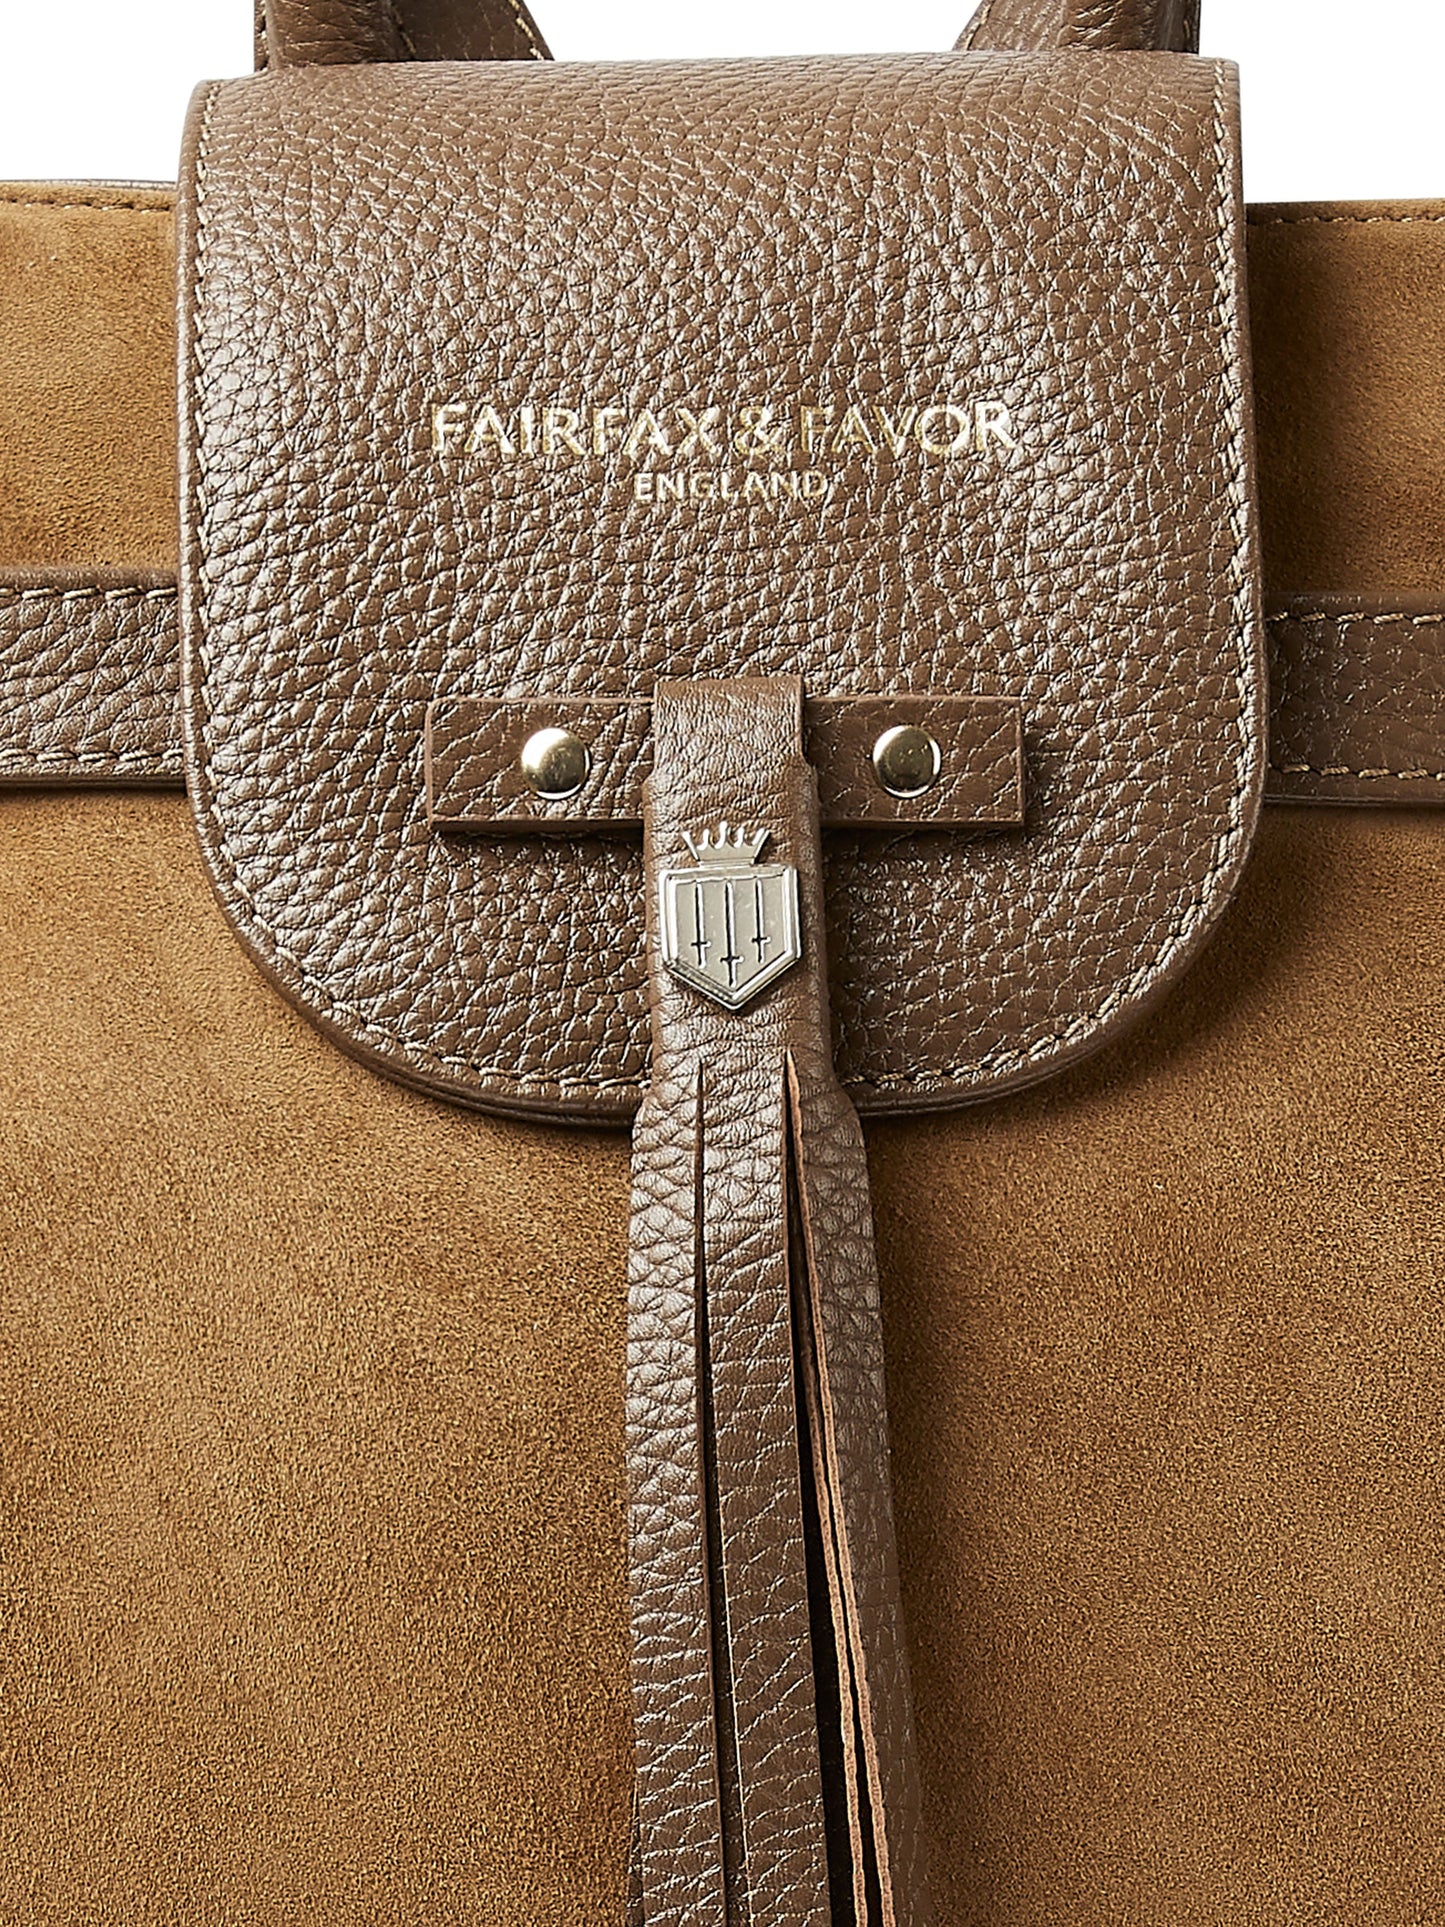 The Windsor Backpack - Tan Suede